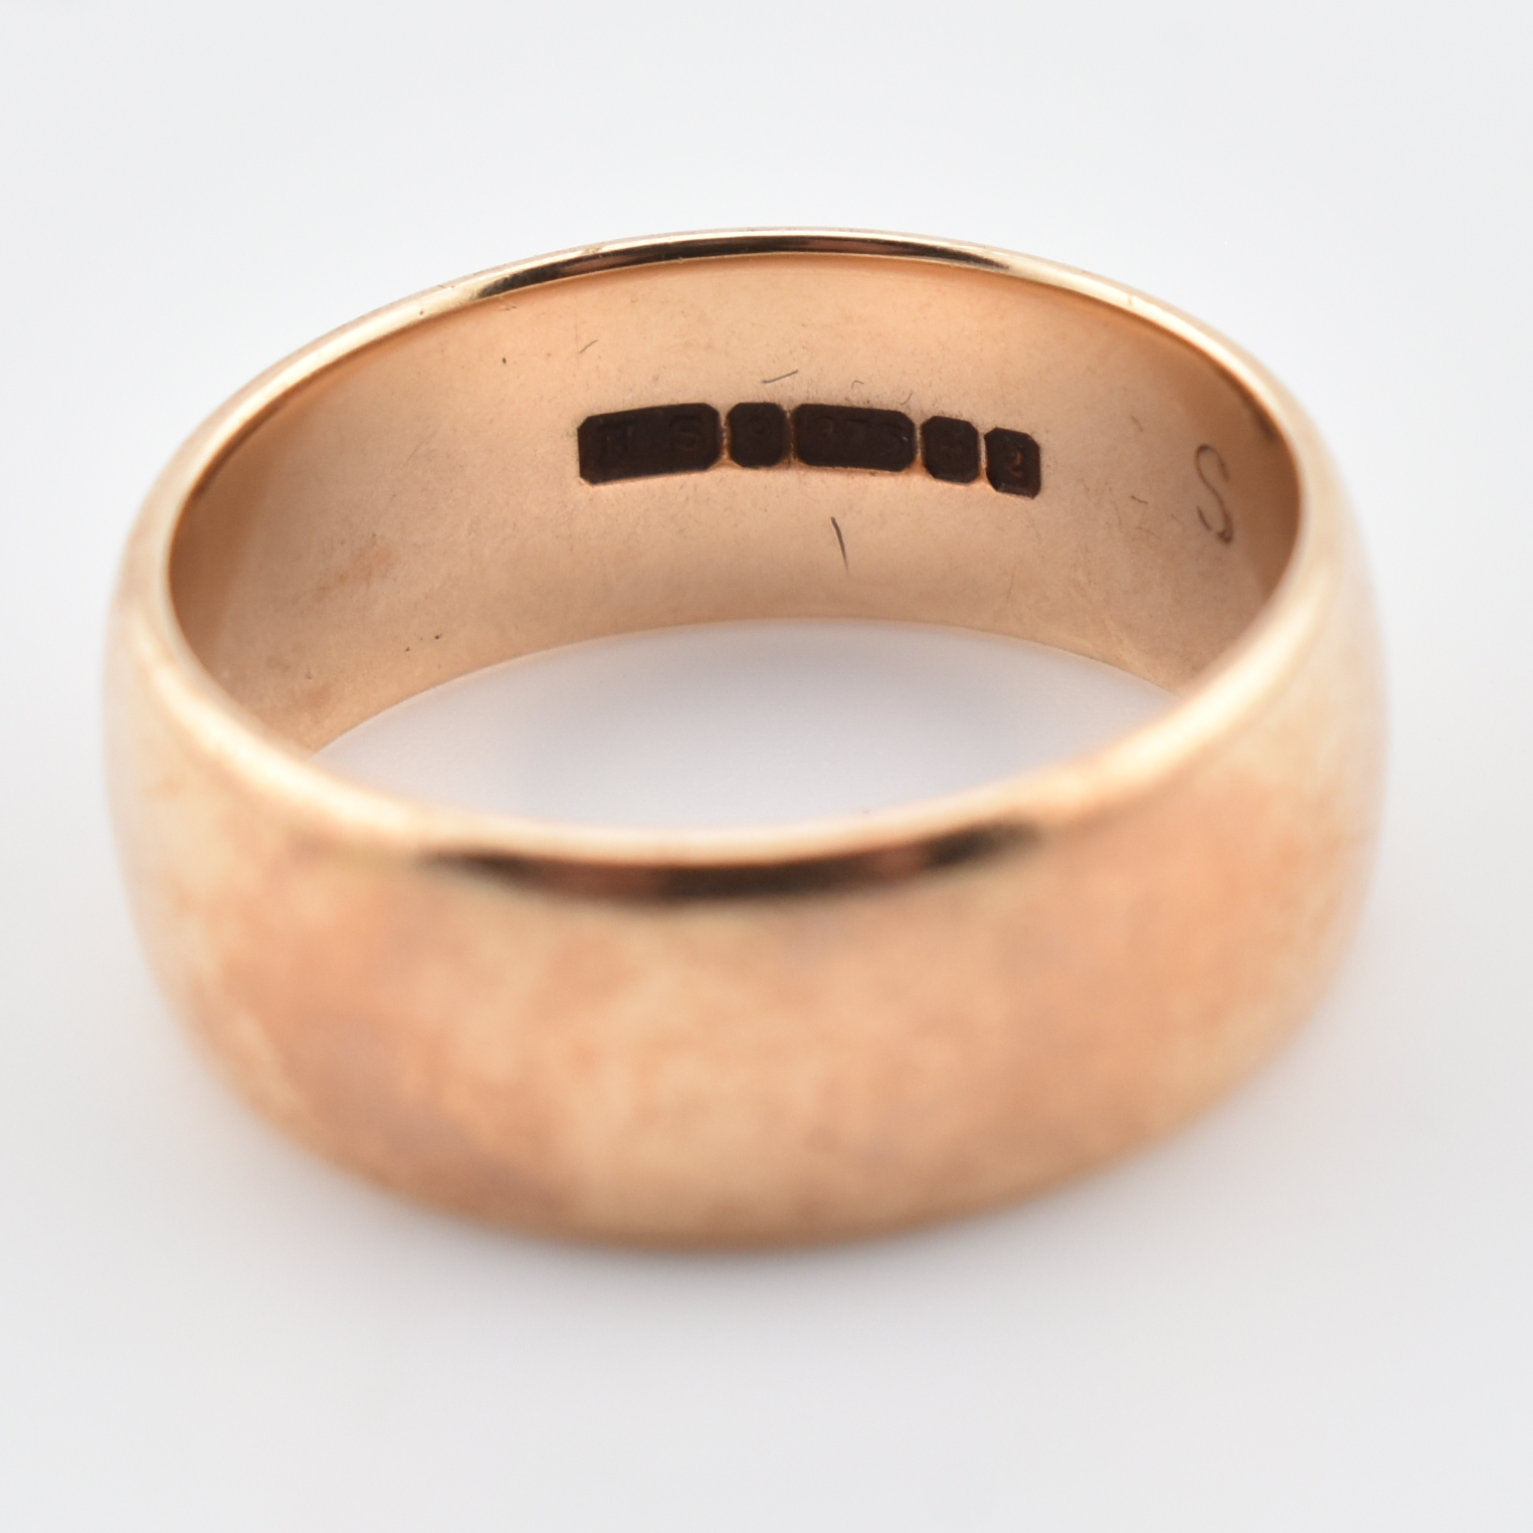 HALLMARKED 9CT GOLD BAND RING - Image 4 of 4